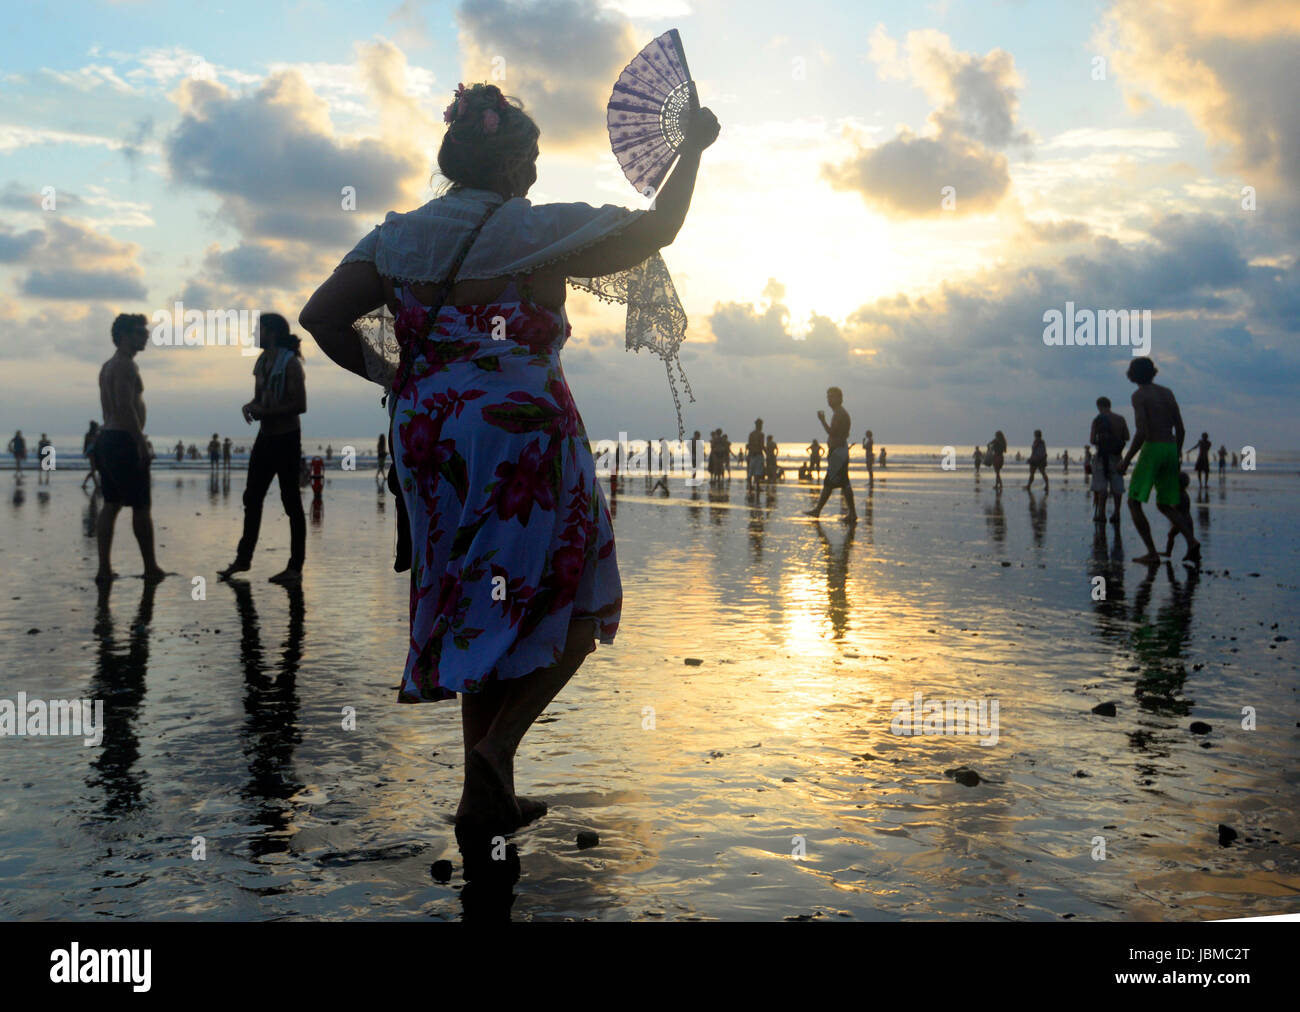 A woman dances with a fan on the beach at sunset at the 2015 Envision Festival, a transformational festival on Costa Rica's Pacific Coast. Stock Photo